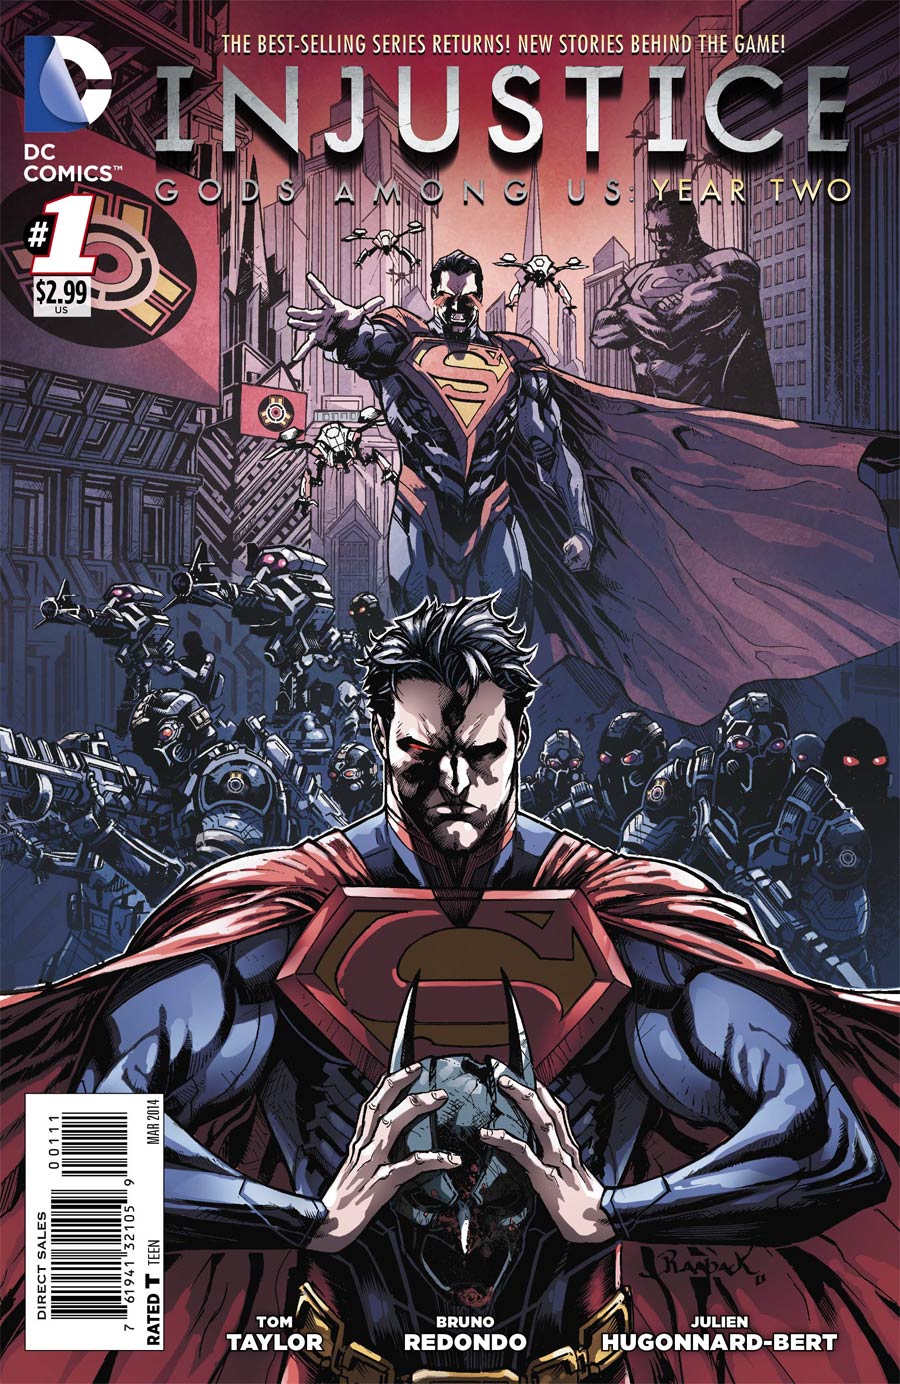 Injustice Gods Among Us Year Two #1